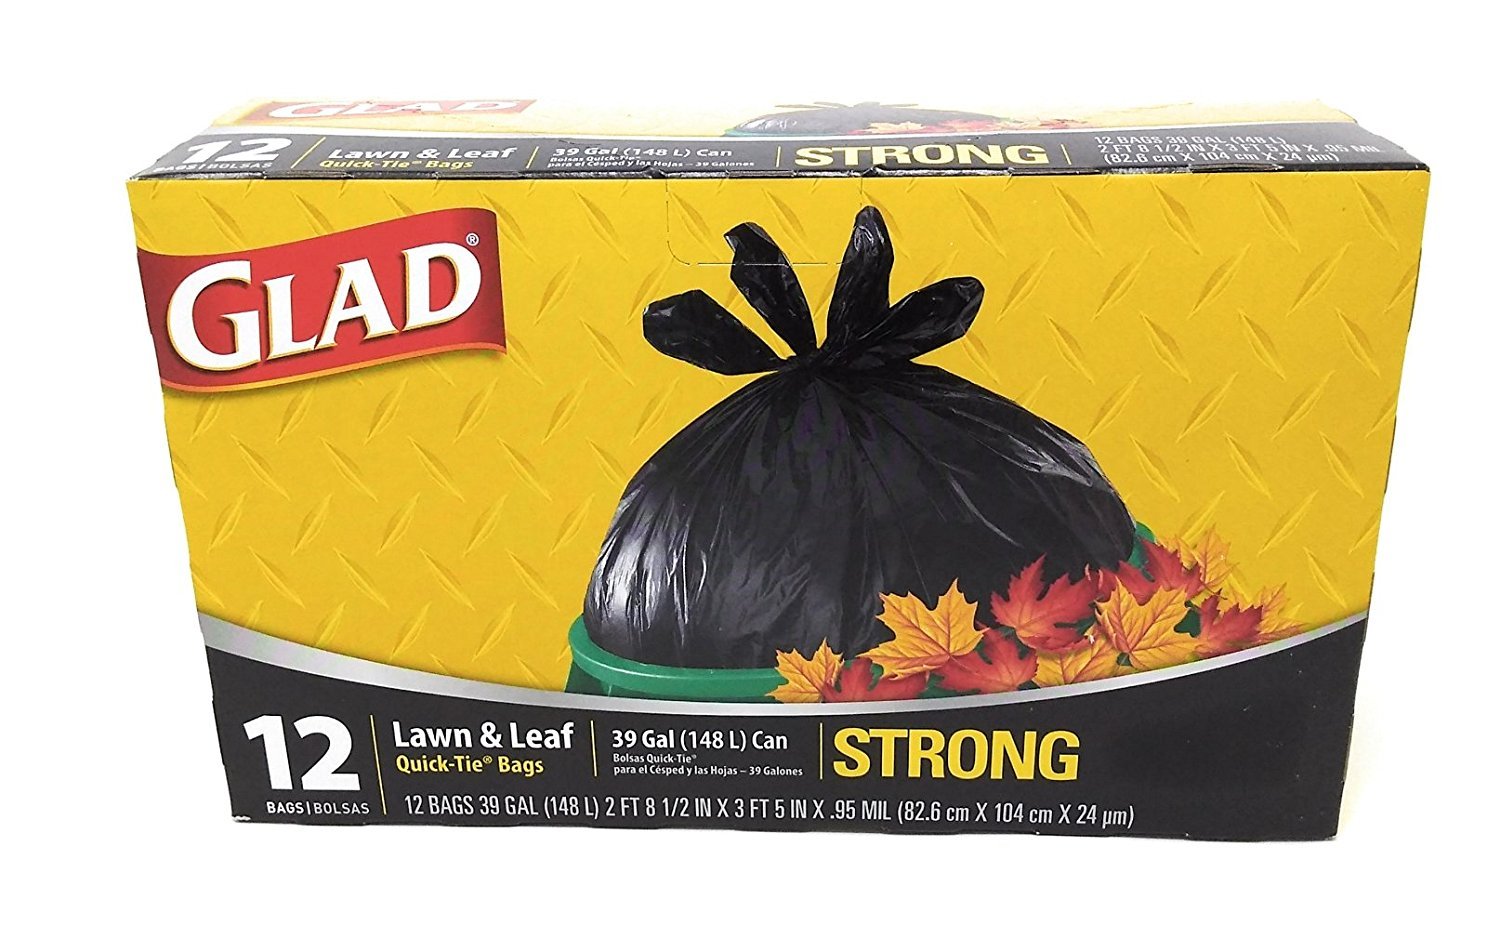 Glad - Lawn & Leaf Trash Bags, 39 Gallon, Quick-Tie, 12 Pack - Case of 12